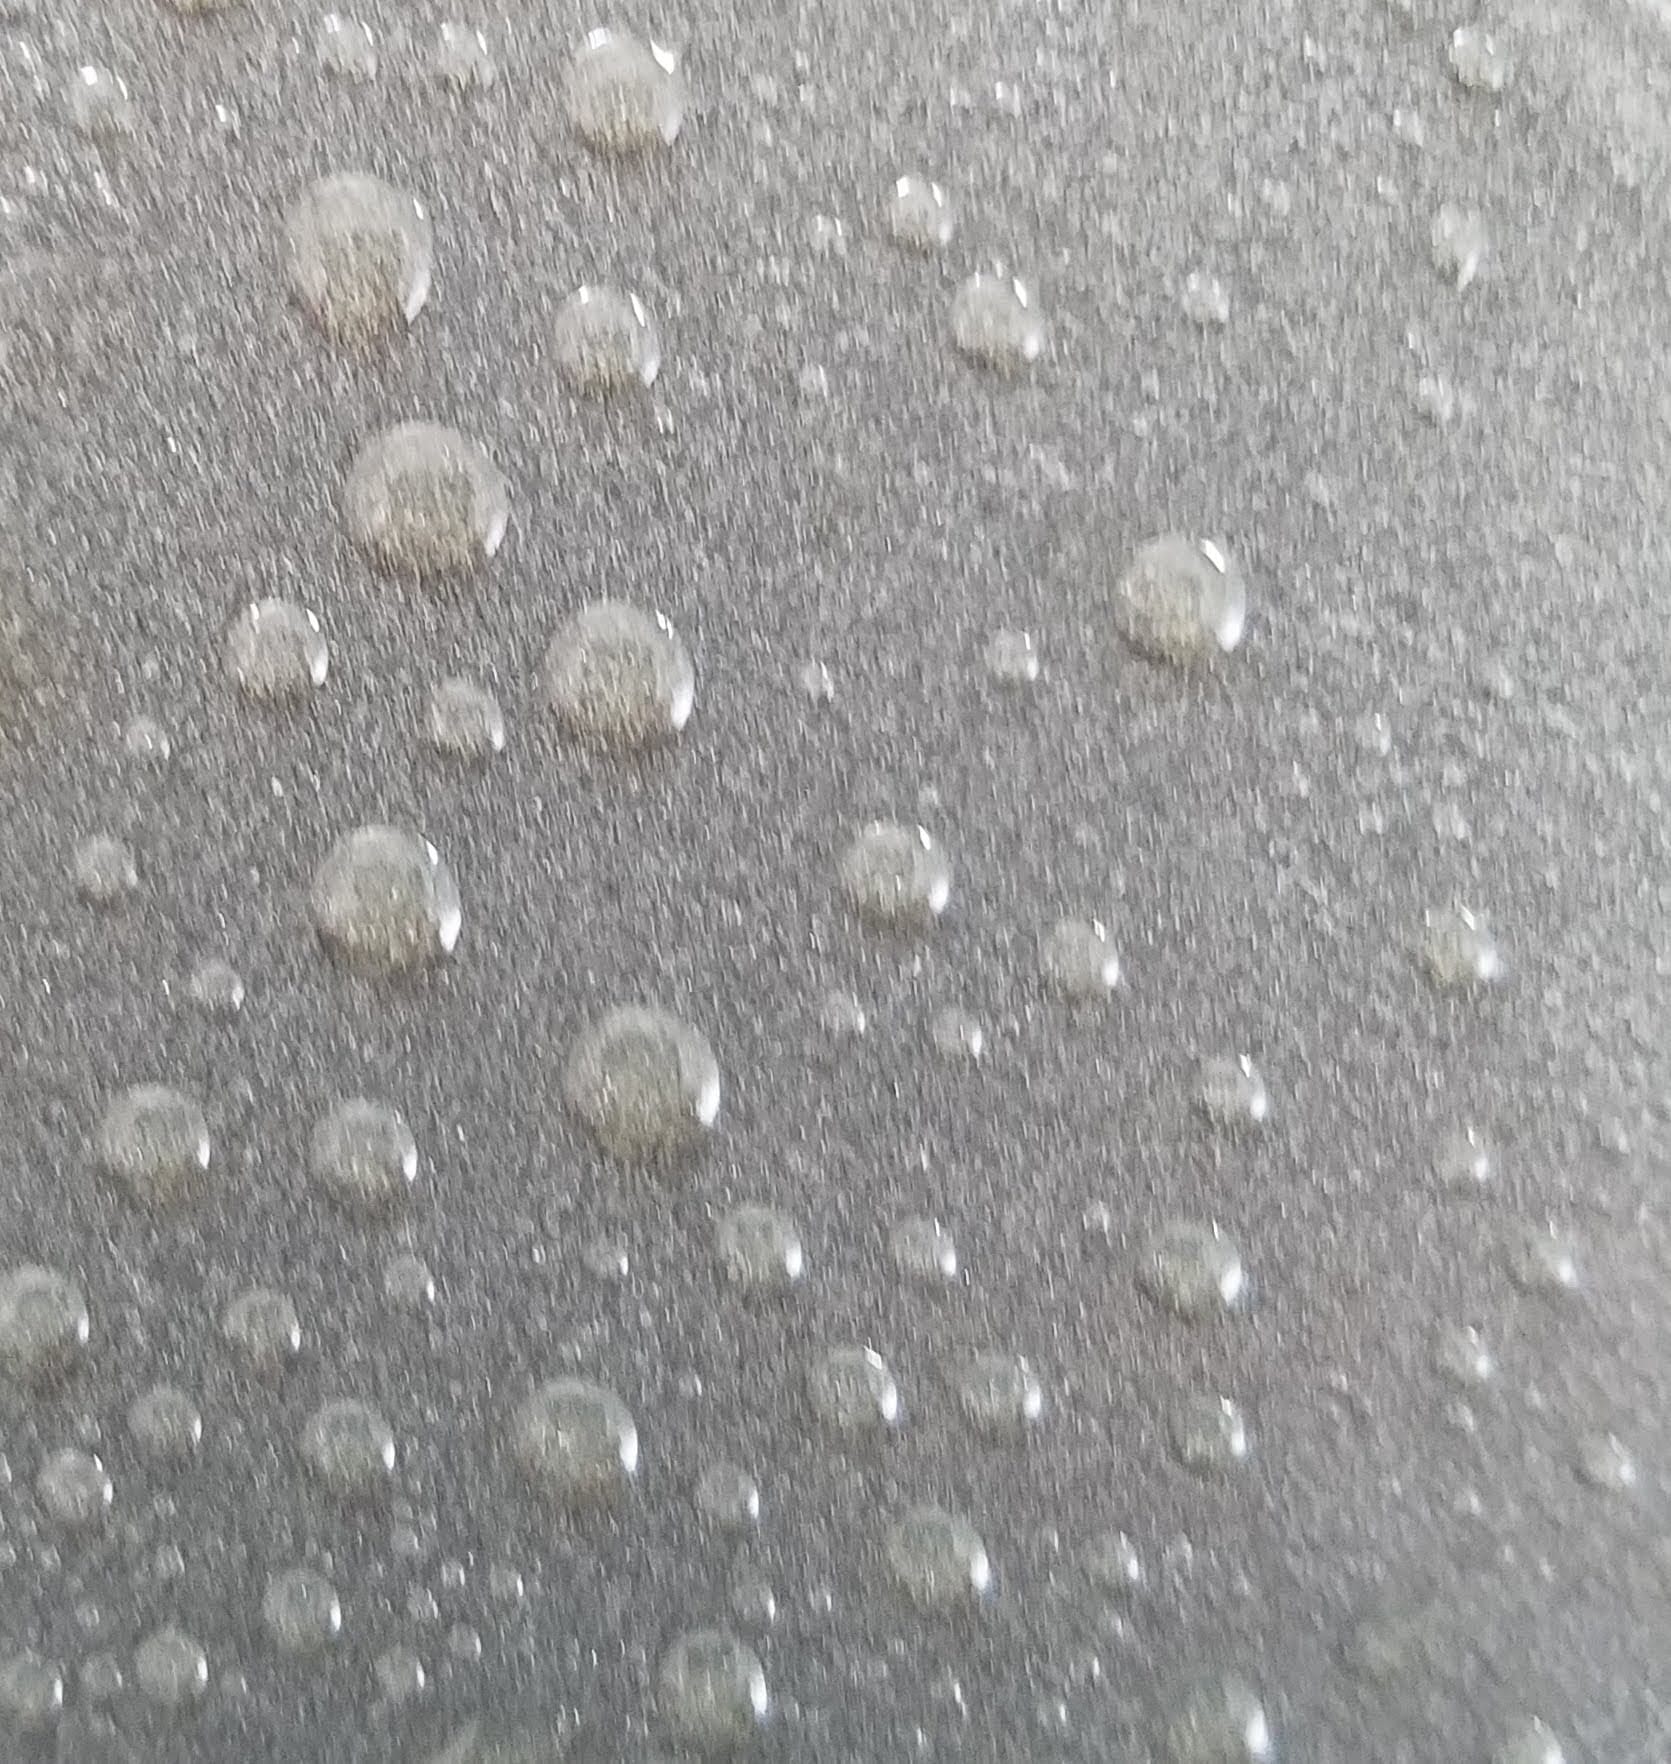 A photograph of raindrops on a piece of glass